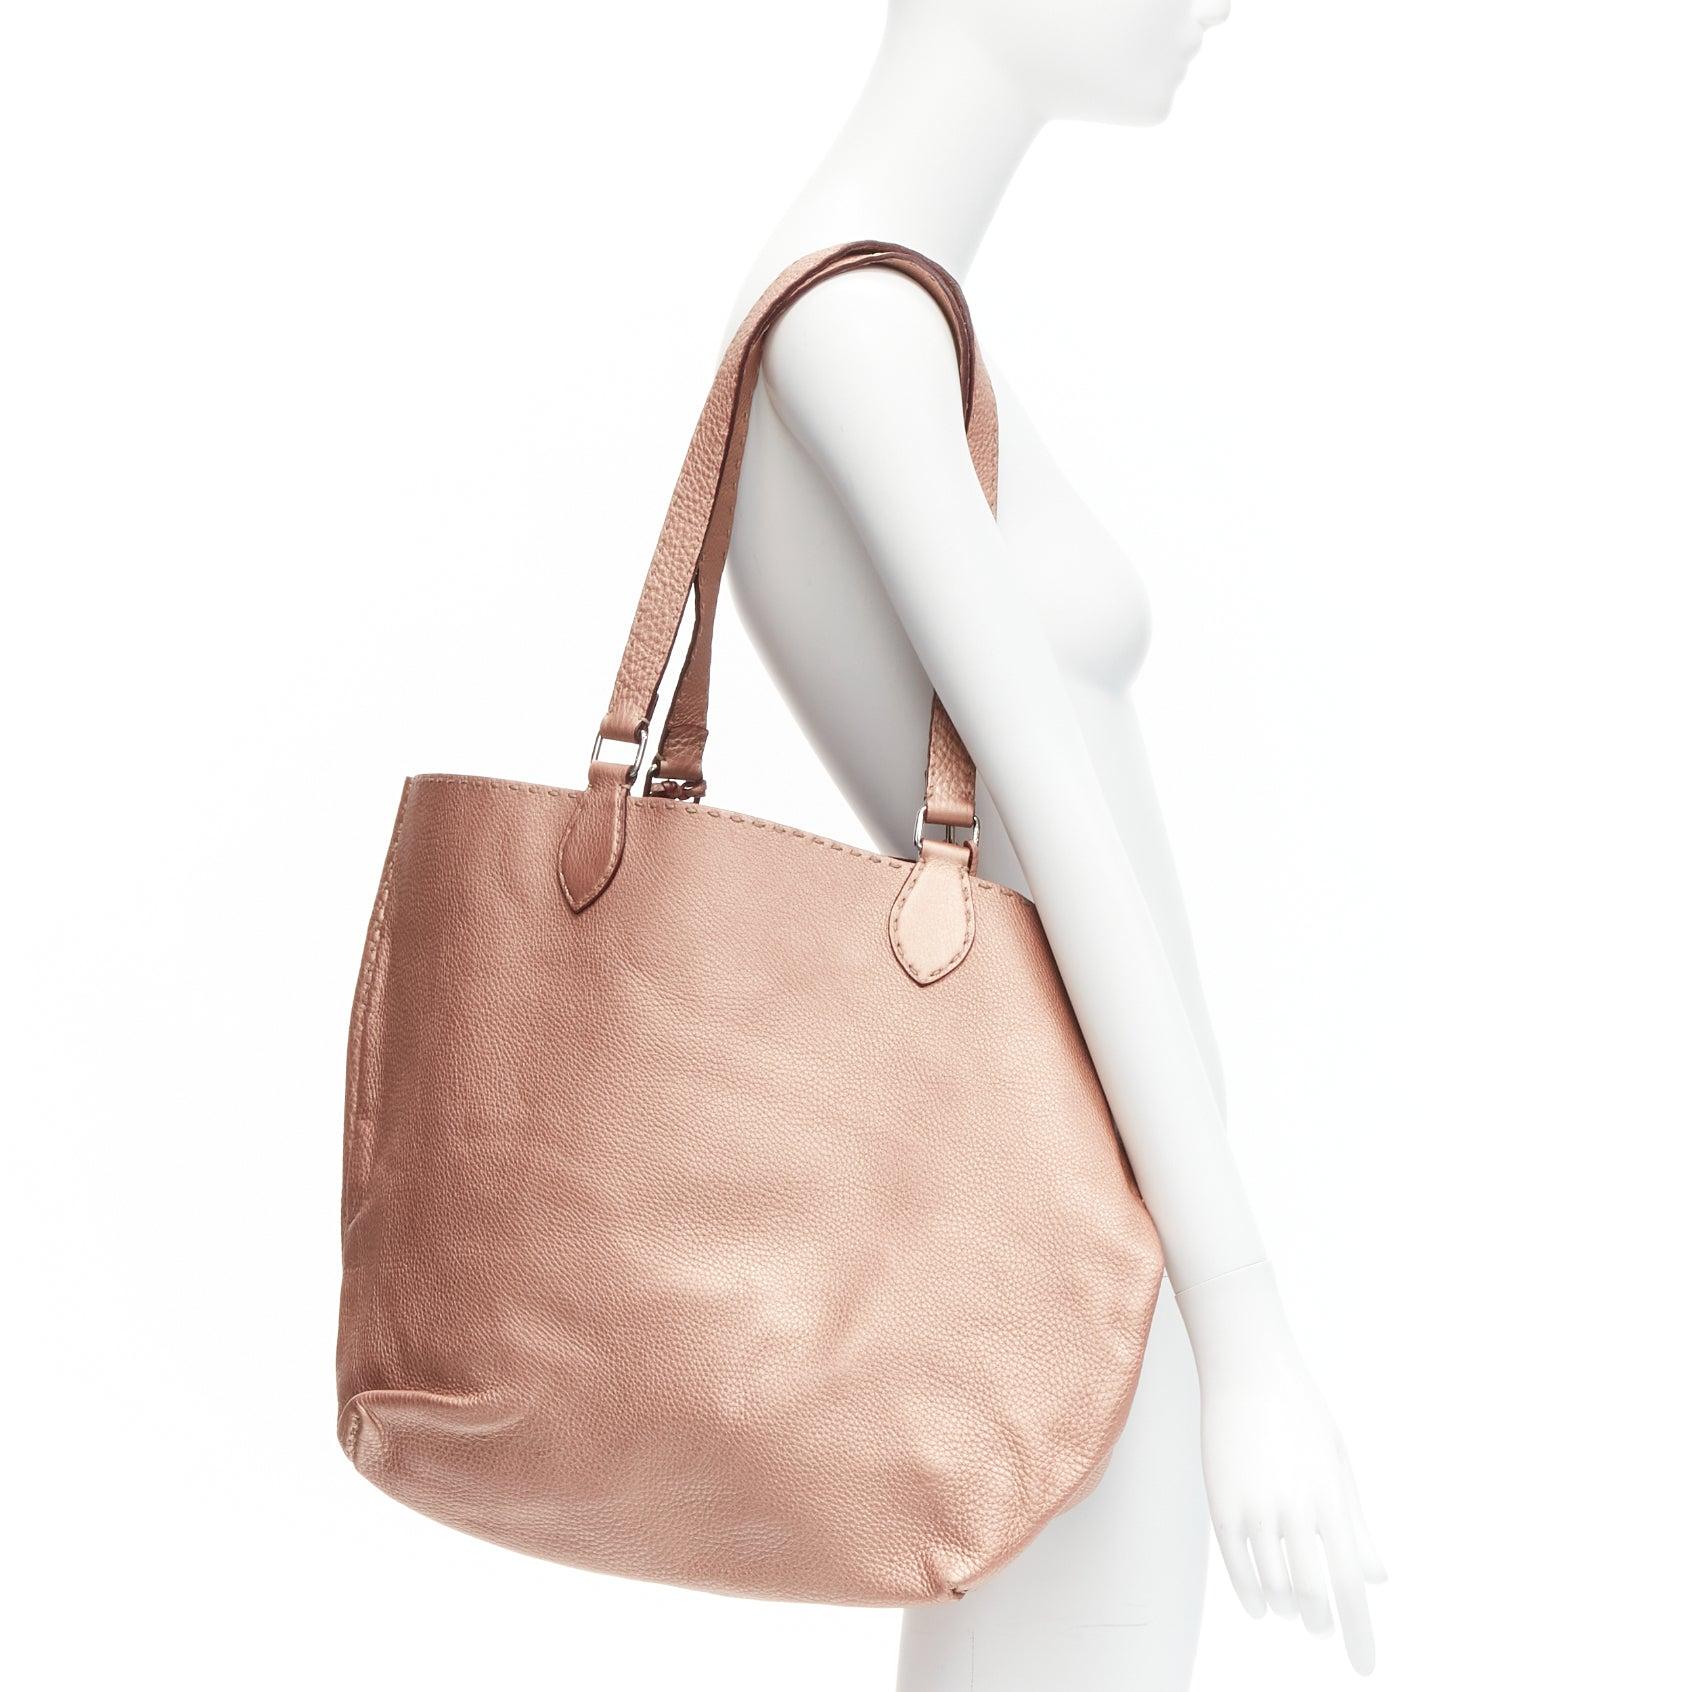 FENDI Selleria metallic rose bronze grained leather signature stitch tote bag
Reference: GIYG/A00295
Brand: Fendi
Collection: Selleria
Material: Leather
Color: Rose Gold
Pattern: Solid
Lining: Red Leather
Extra Details: Matching small pouch